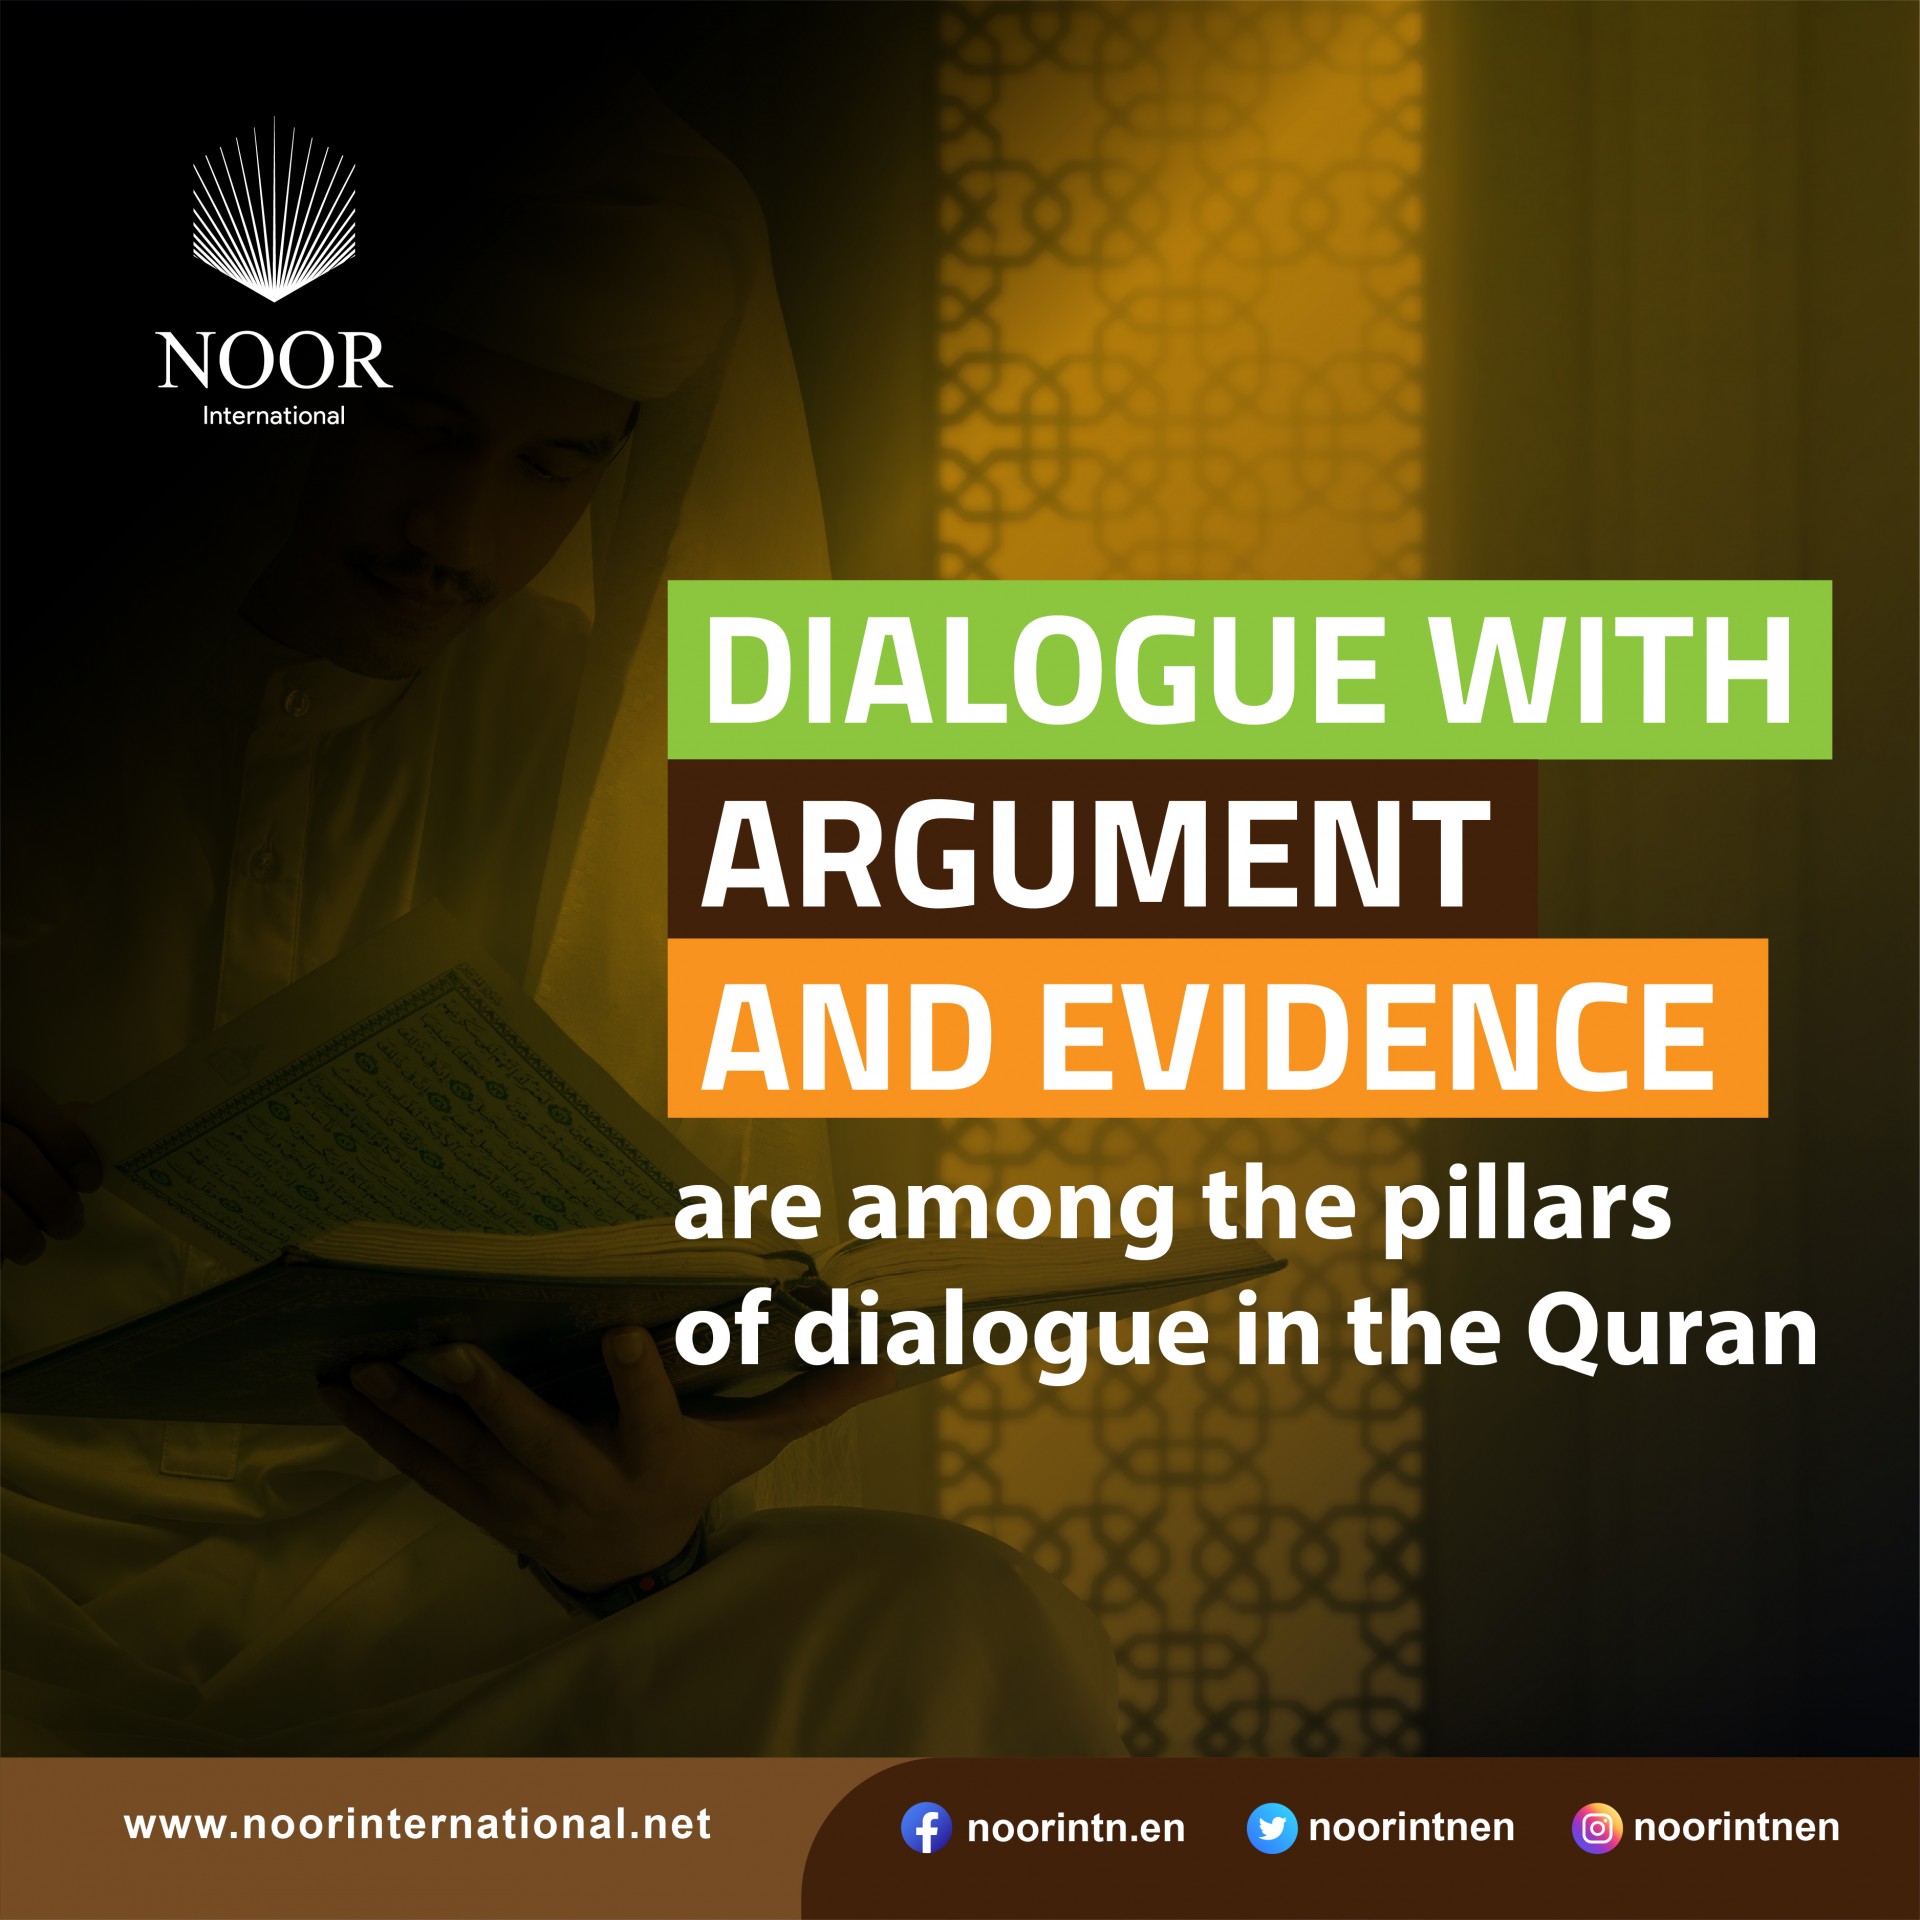 Dialogue with argument and evidence are among the pillars of dialogue in the Quran